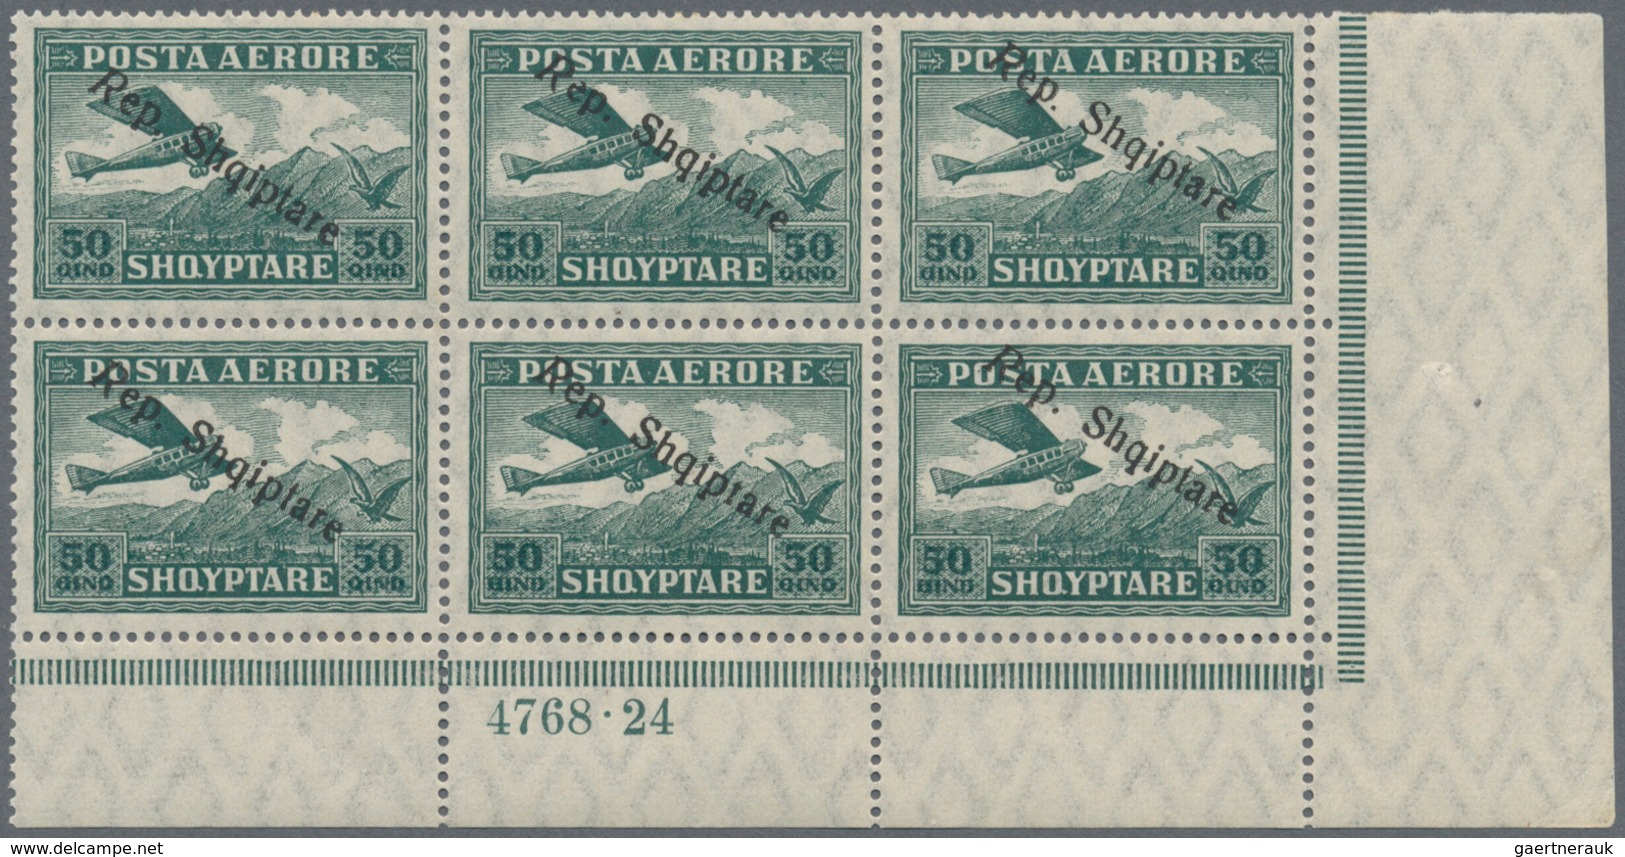 Albanien: 1927, 50 Q, 1 F And 2 F Airmail Stamps With Ovp "Rep.Shqiptare", Three Lower Right Corner - Albanien